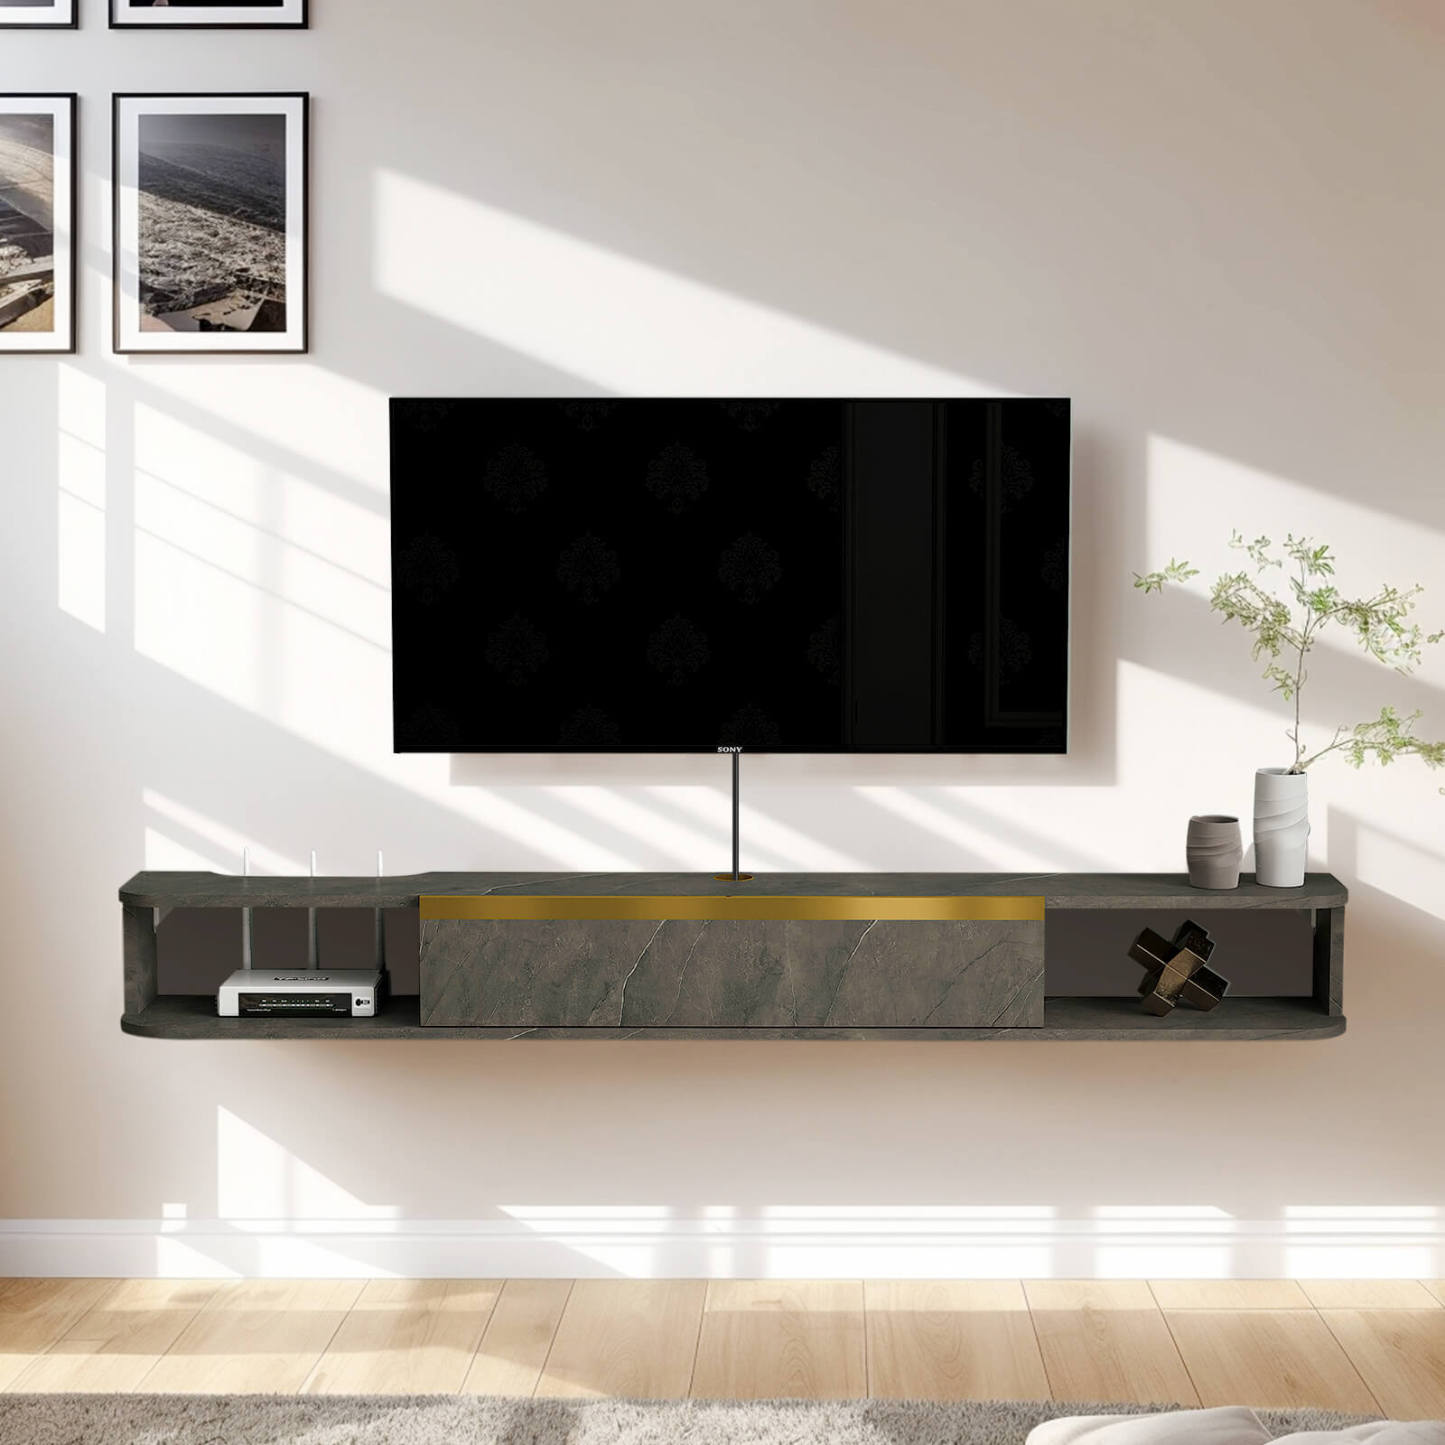 62.99" Wood Floating TV Stand Wall Shelf with Golden Accent for 65" 70" TV, Dark Grey